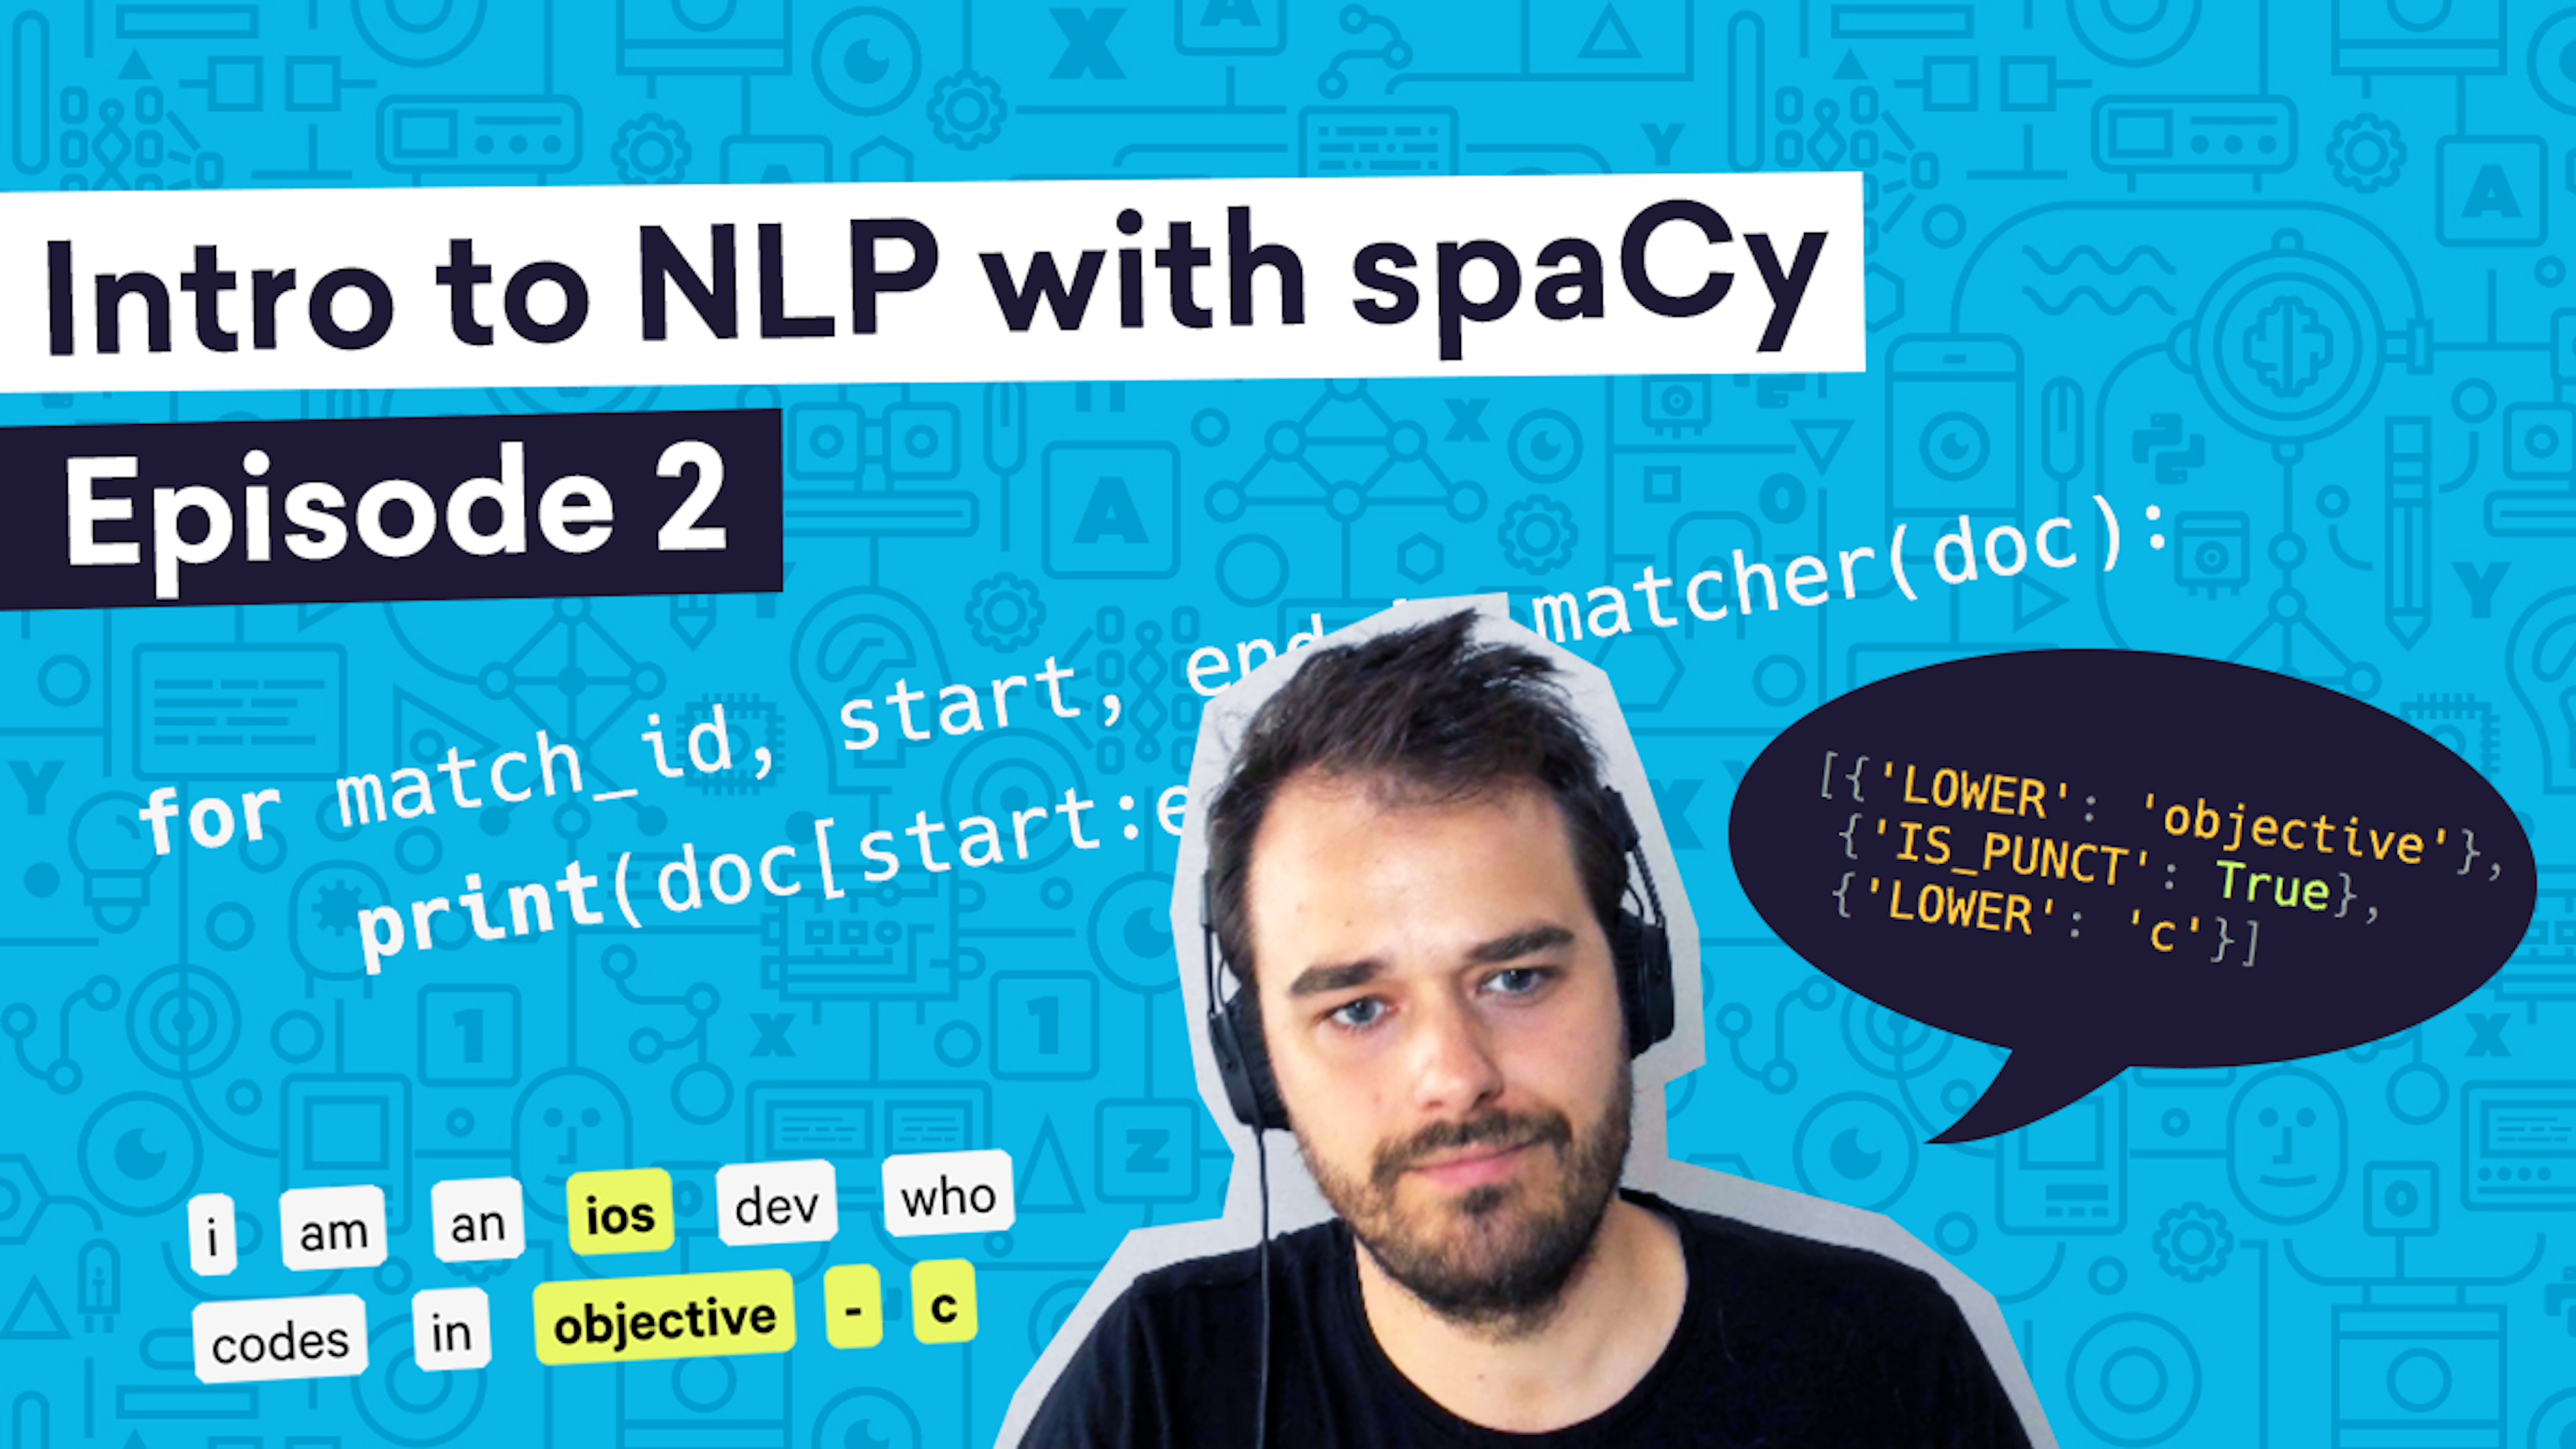 Intro to NLP with spaCy (2): Detecting programming languages